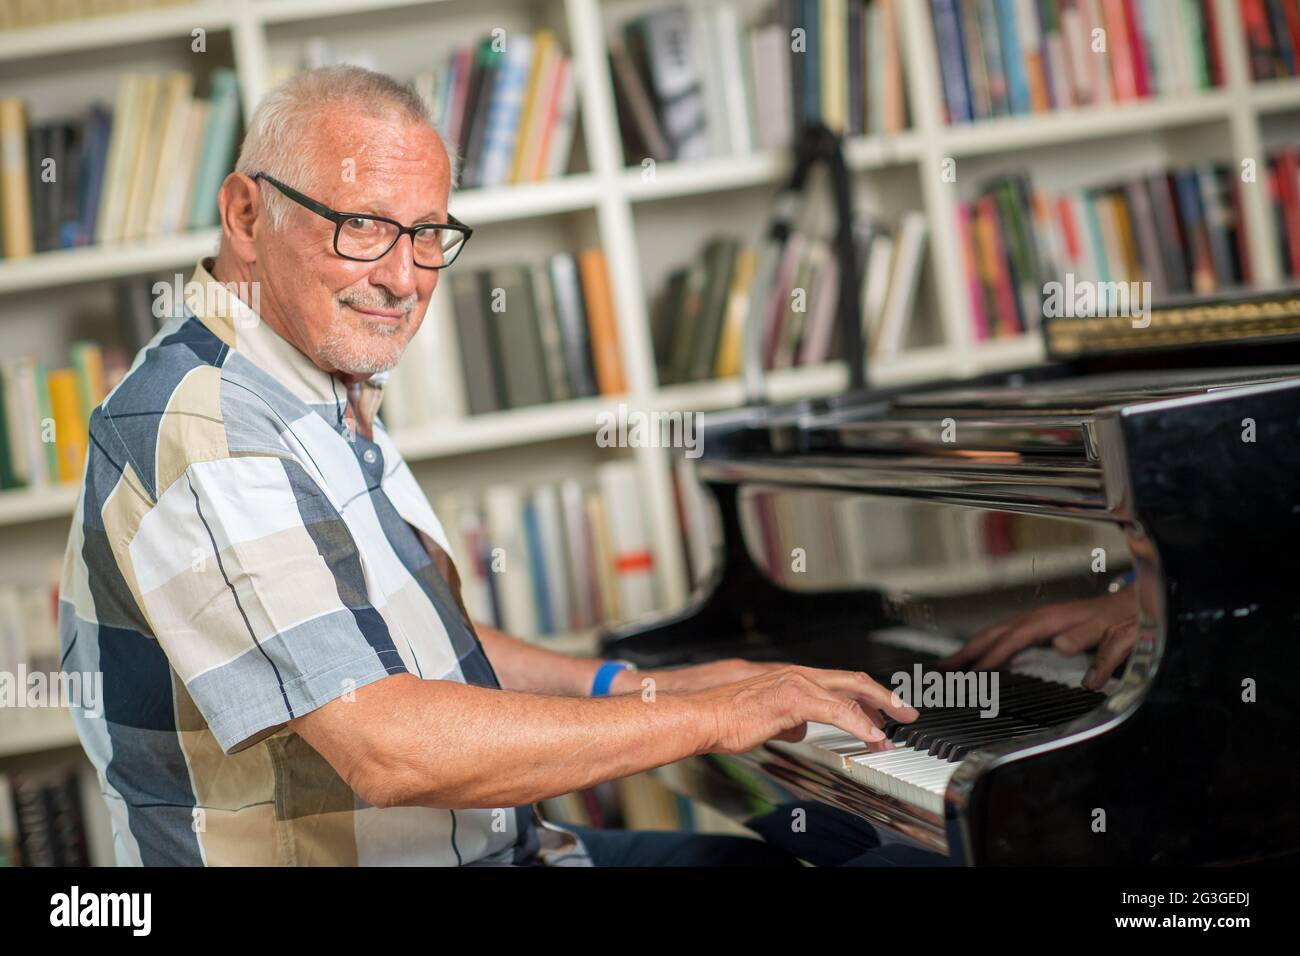 Munich, Germany. 15th June, 2021. The singer Konstantin Wecker photographed during a photo session for the Deutsche Presse-Agentur in his apartment. The musician's new album 'Utopia' will be released on 18.06.2021. Credit: Peter Kneffel/dpa/Alamy Live News Stock Photo